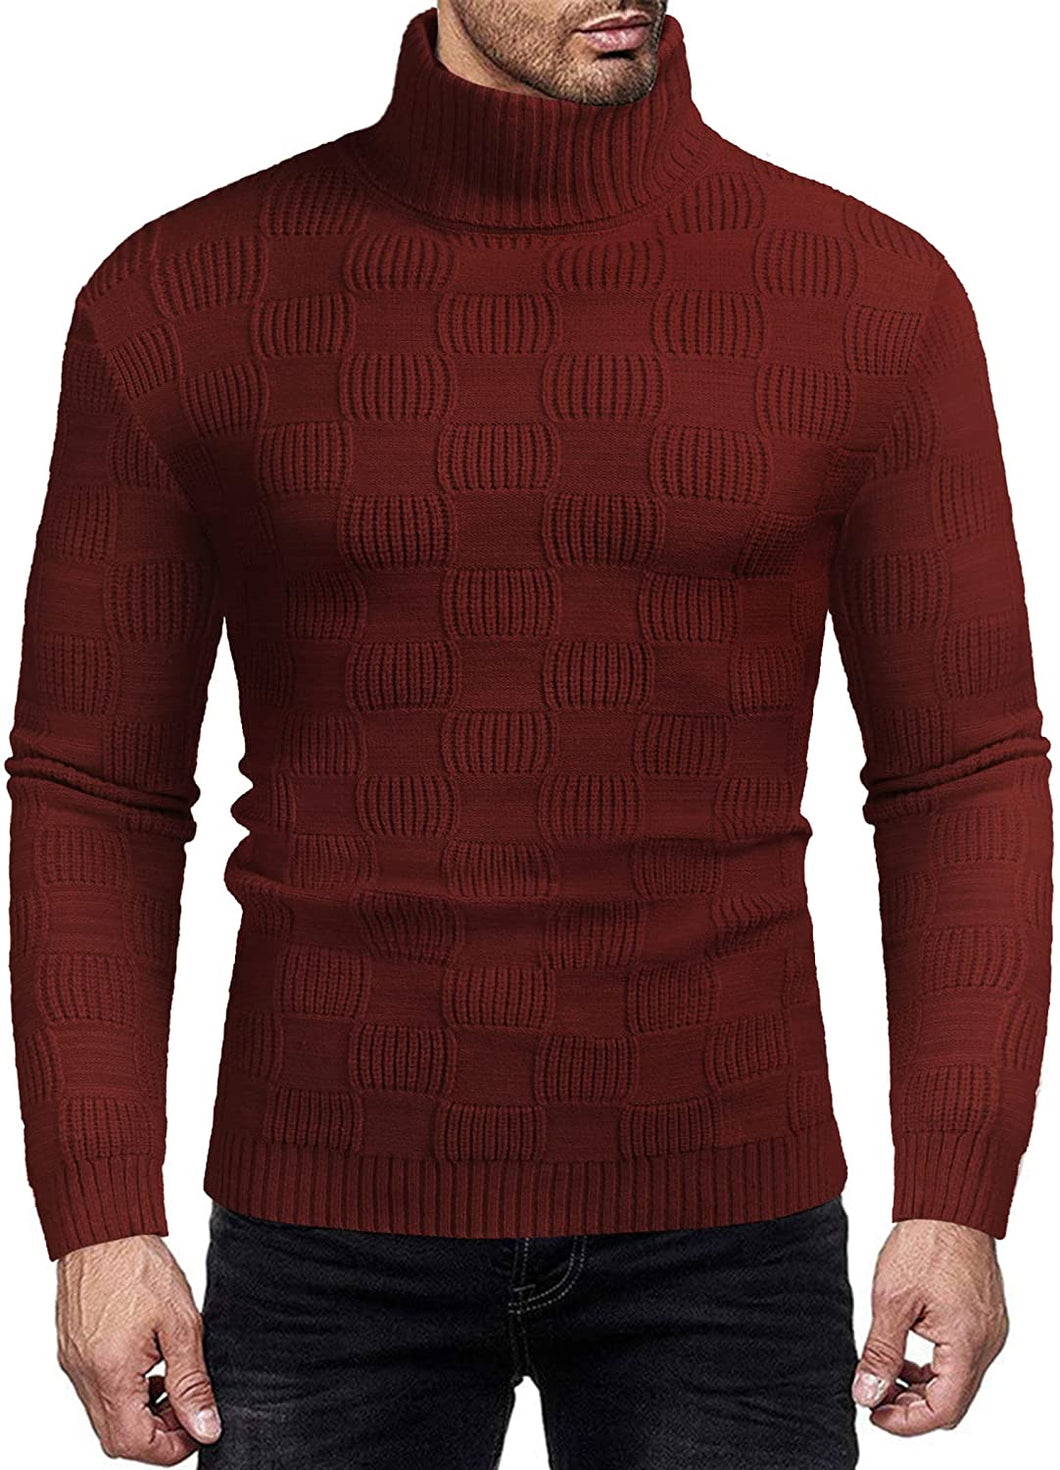 Thermal Ribbed Wine Red Pullover Turtleneck Knitted Sweater